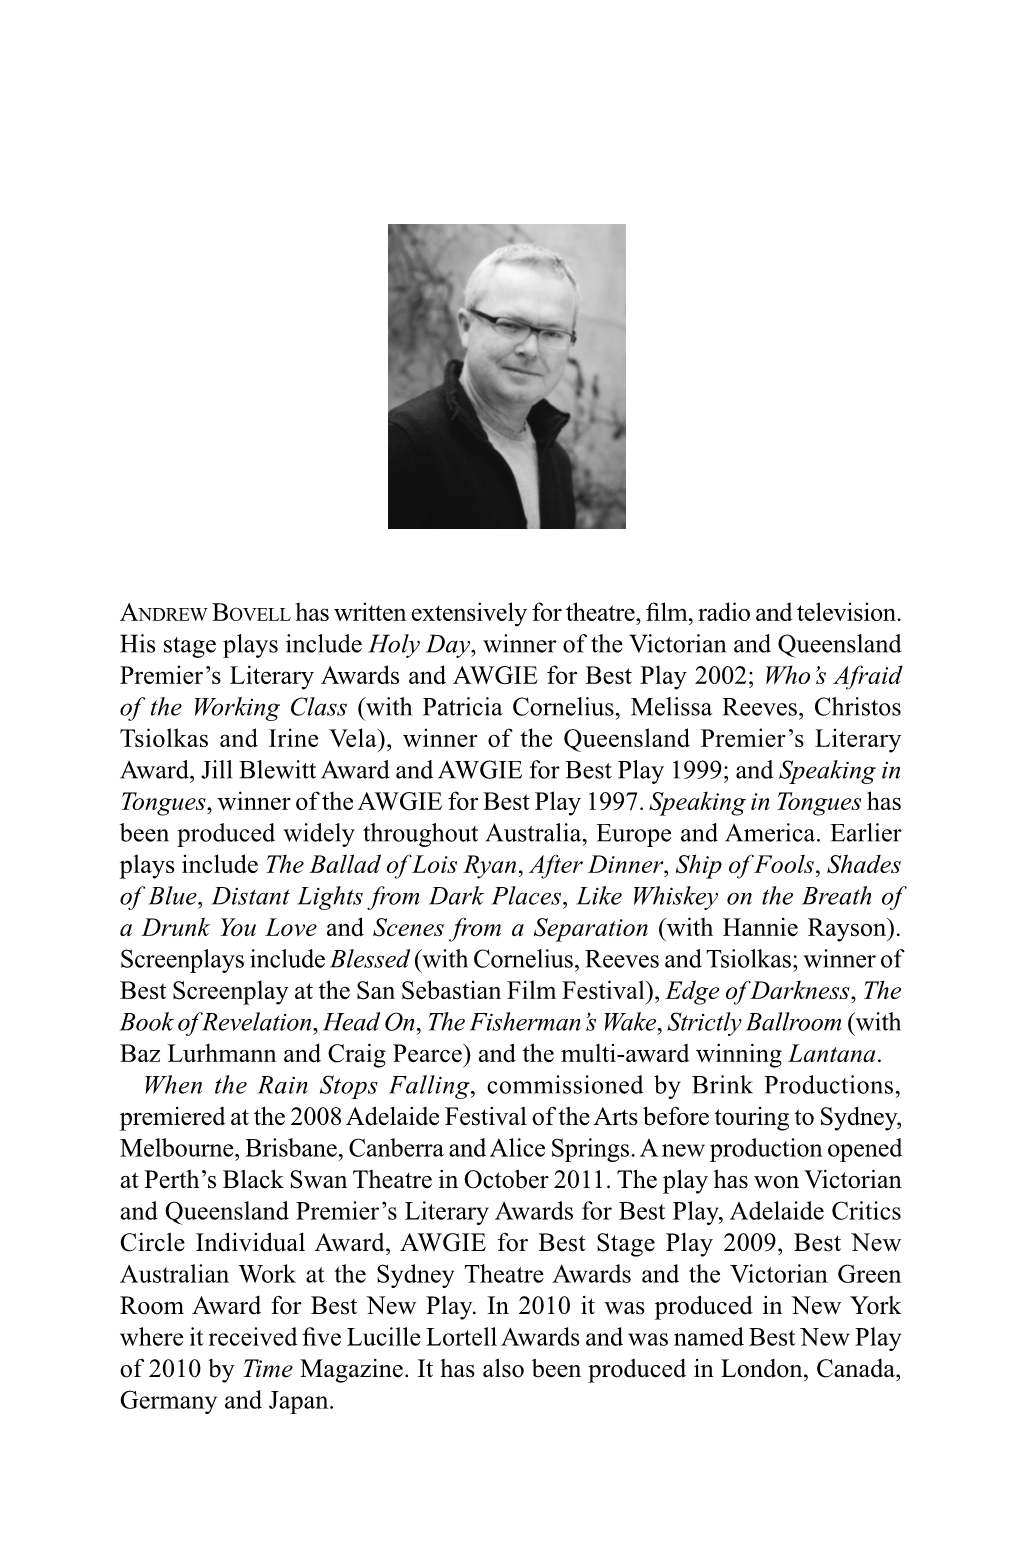 Andrew Bovell Has Written Extensively for Theatre, Film, Radio and Television